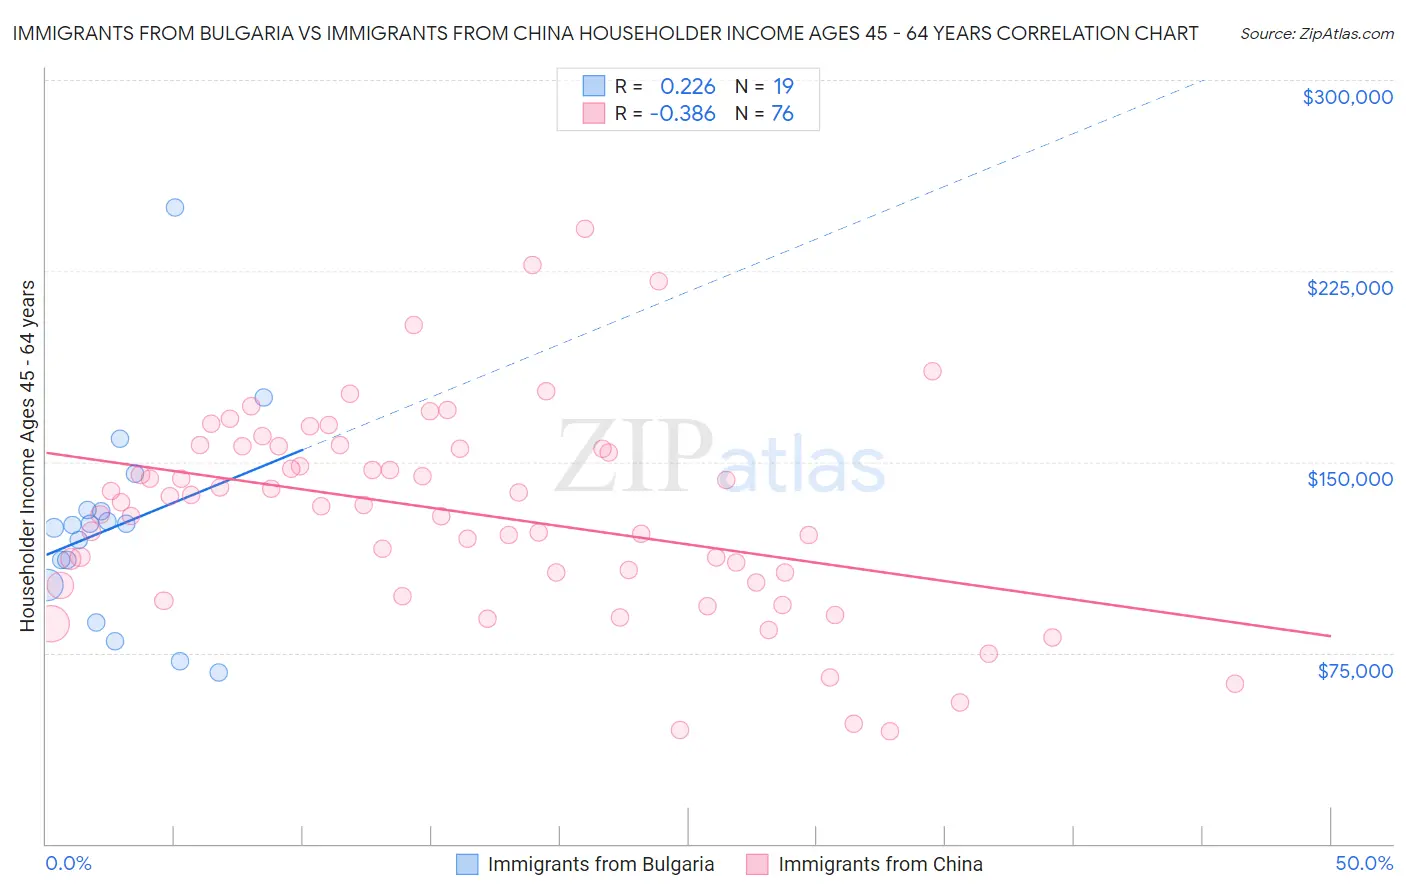 Immigrants from Bulgaria vs Immigrants from China Householder Income Ages 45 - 64 years